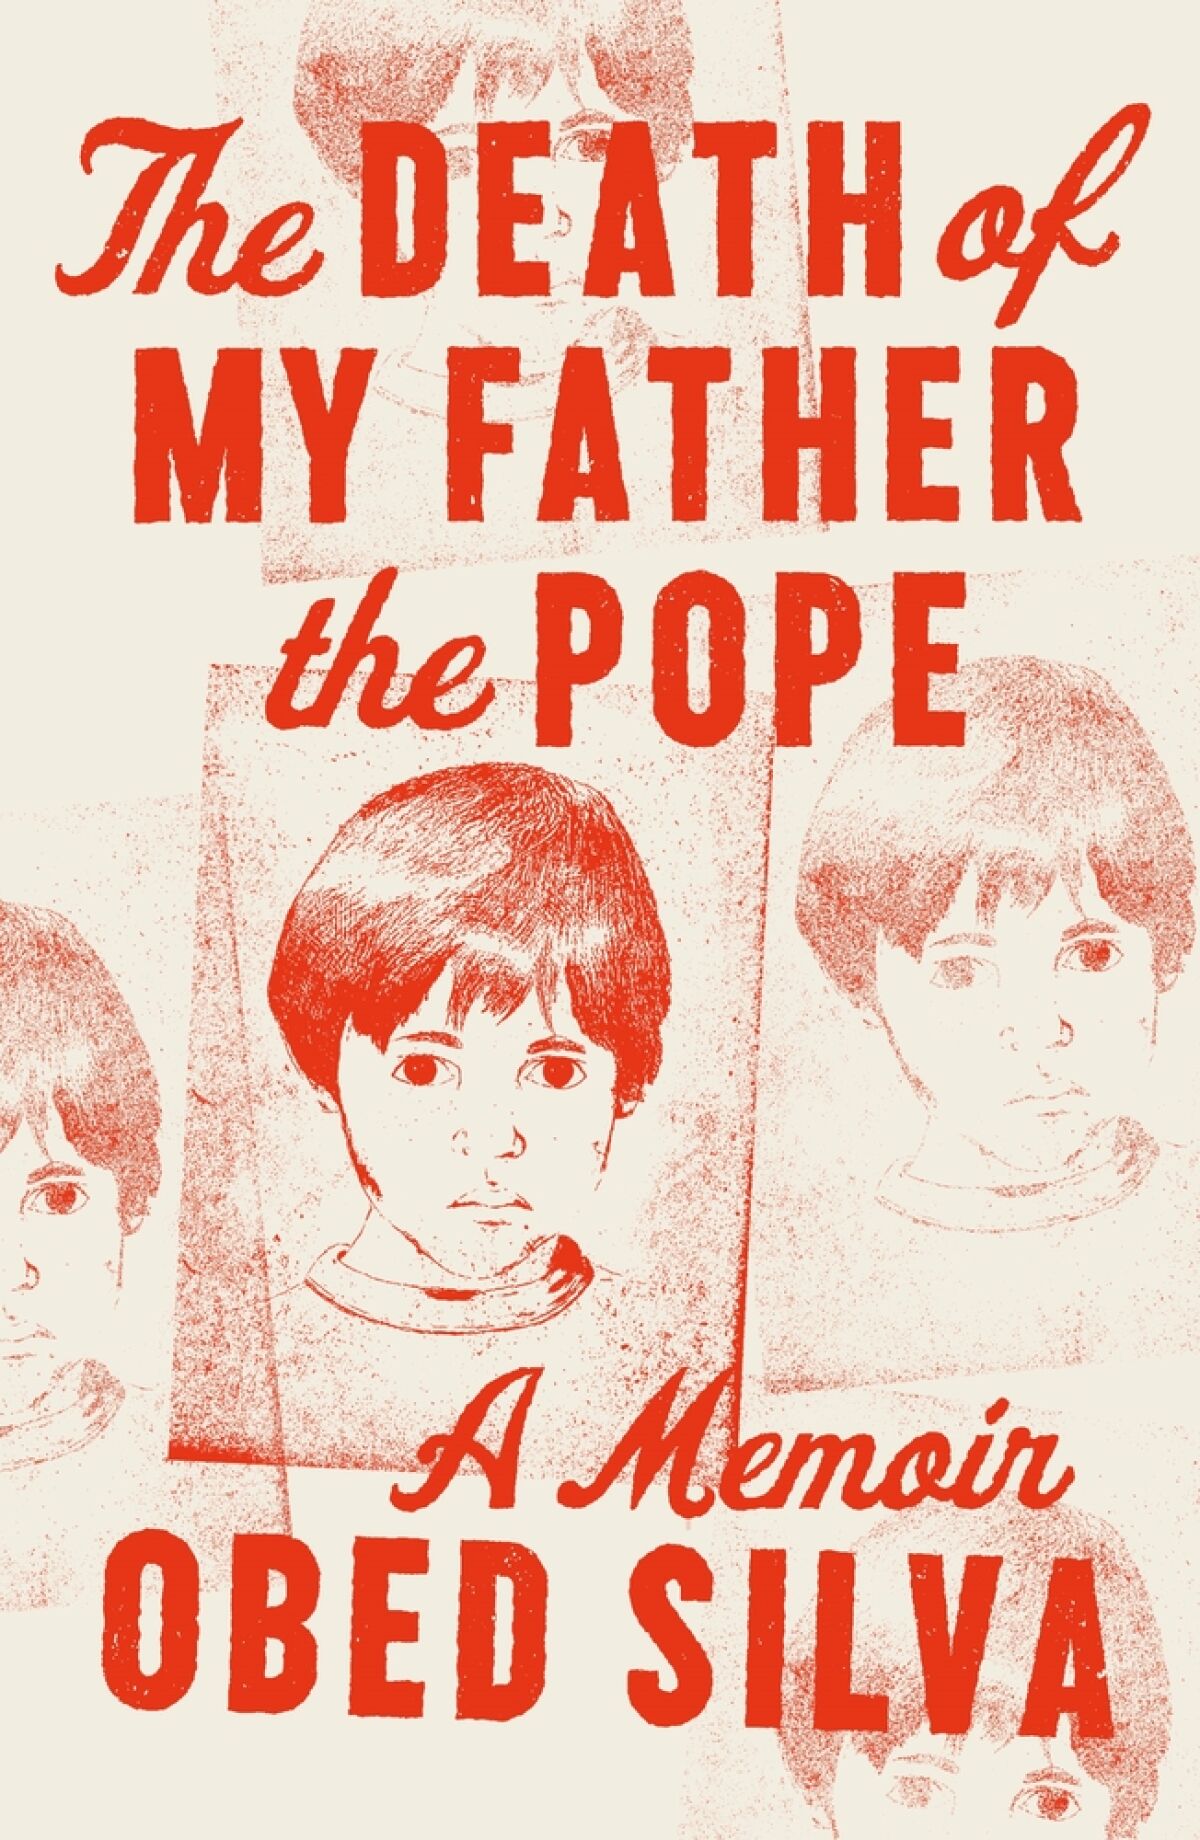 The cover of the book "The Death of My Father the Pope" features drawings of a little boy's head.